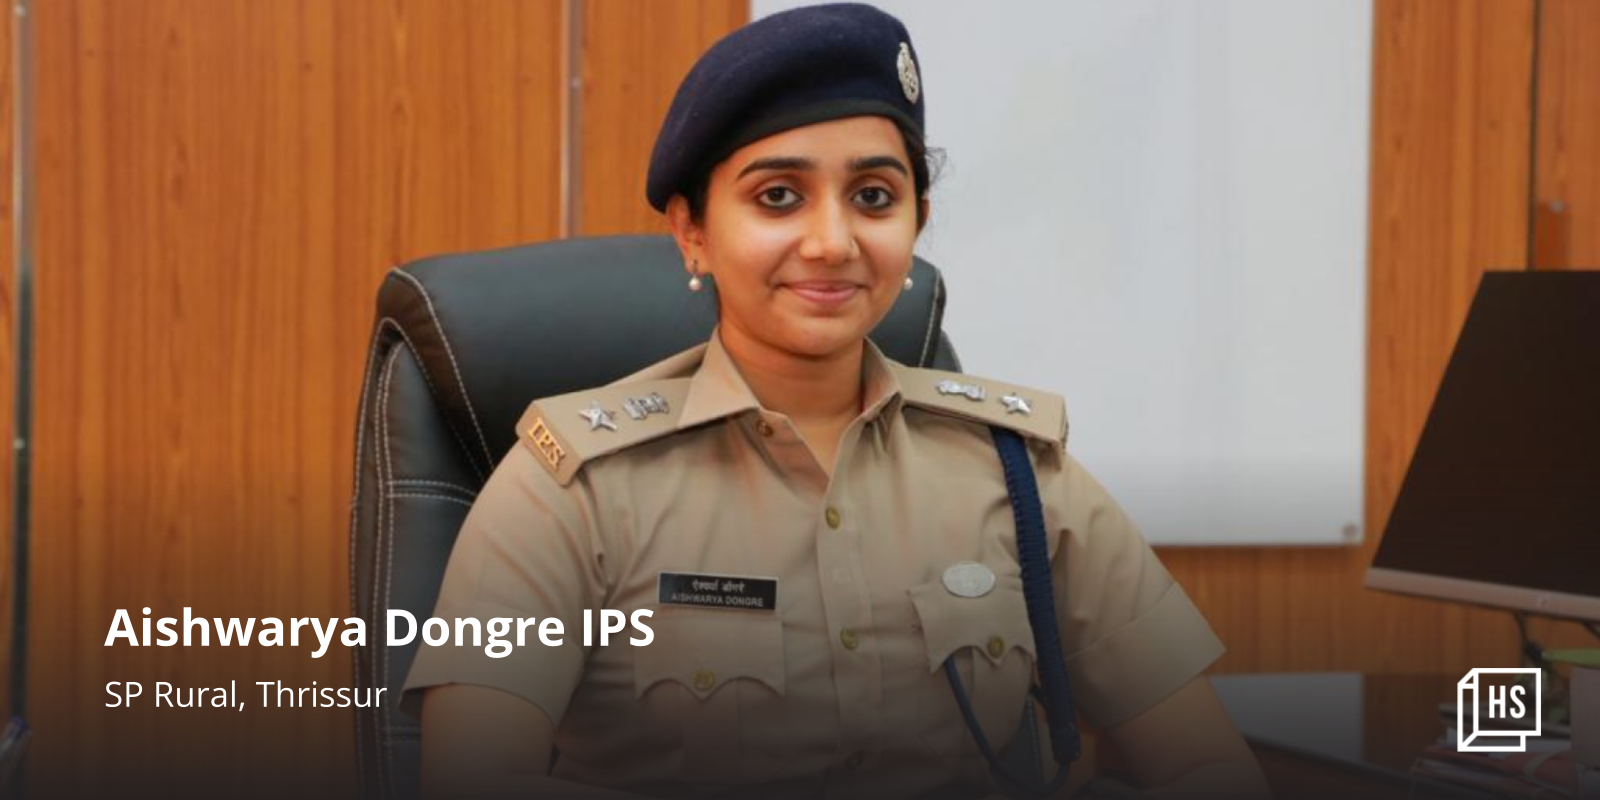 IPS officer Aishwarya Dongre believes we must be the change we want to see